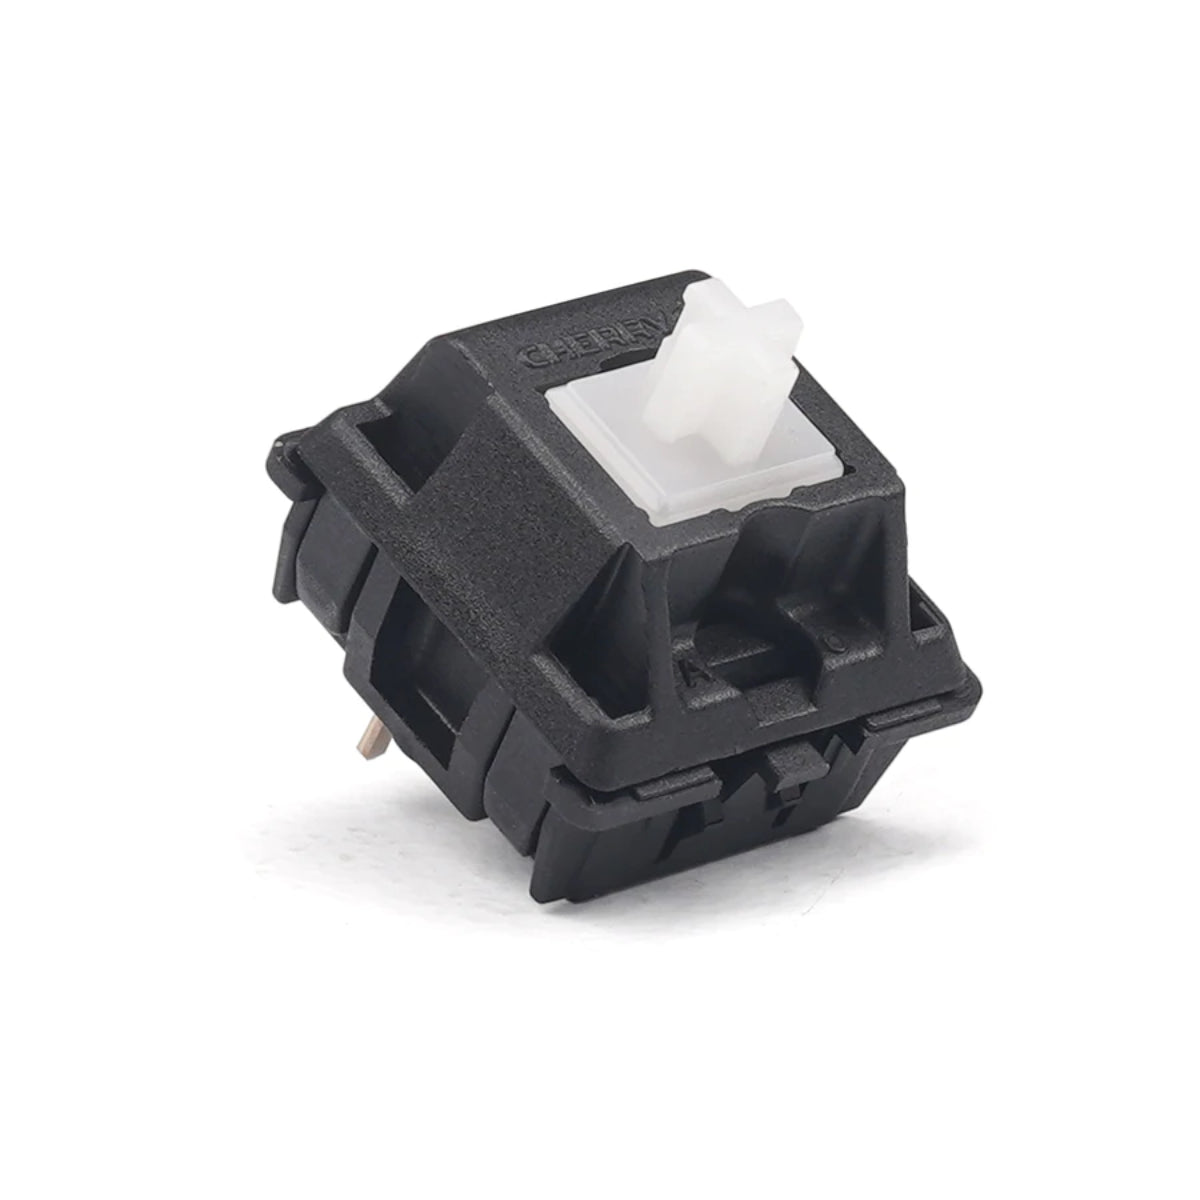 KBD Fans Cherry MX Hyperglide Switches - Clear - Store 974 | ستور ٩٧٤